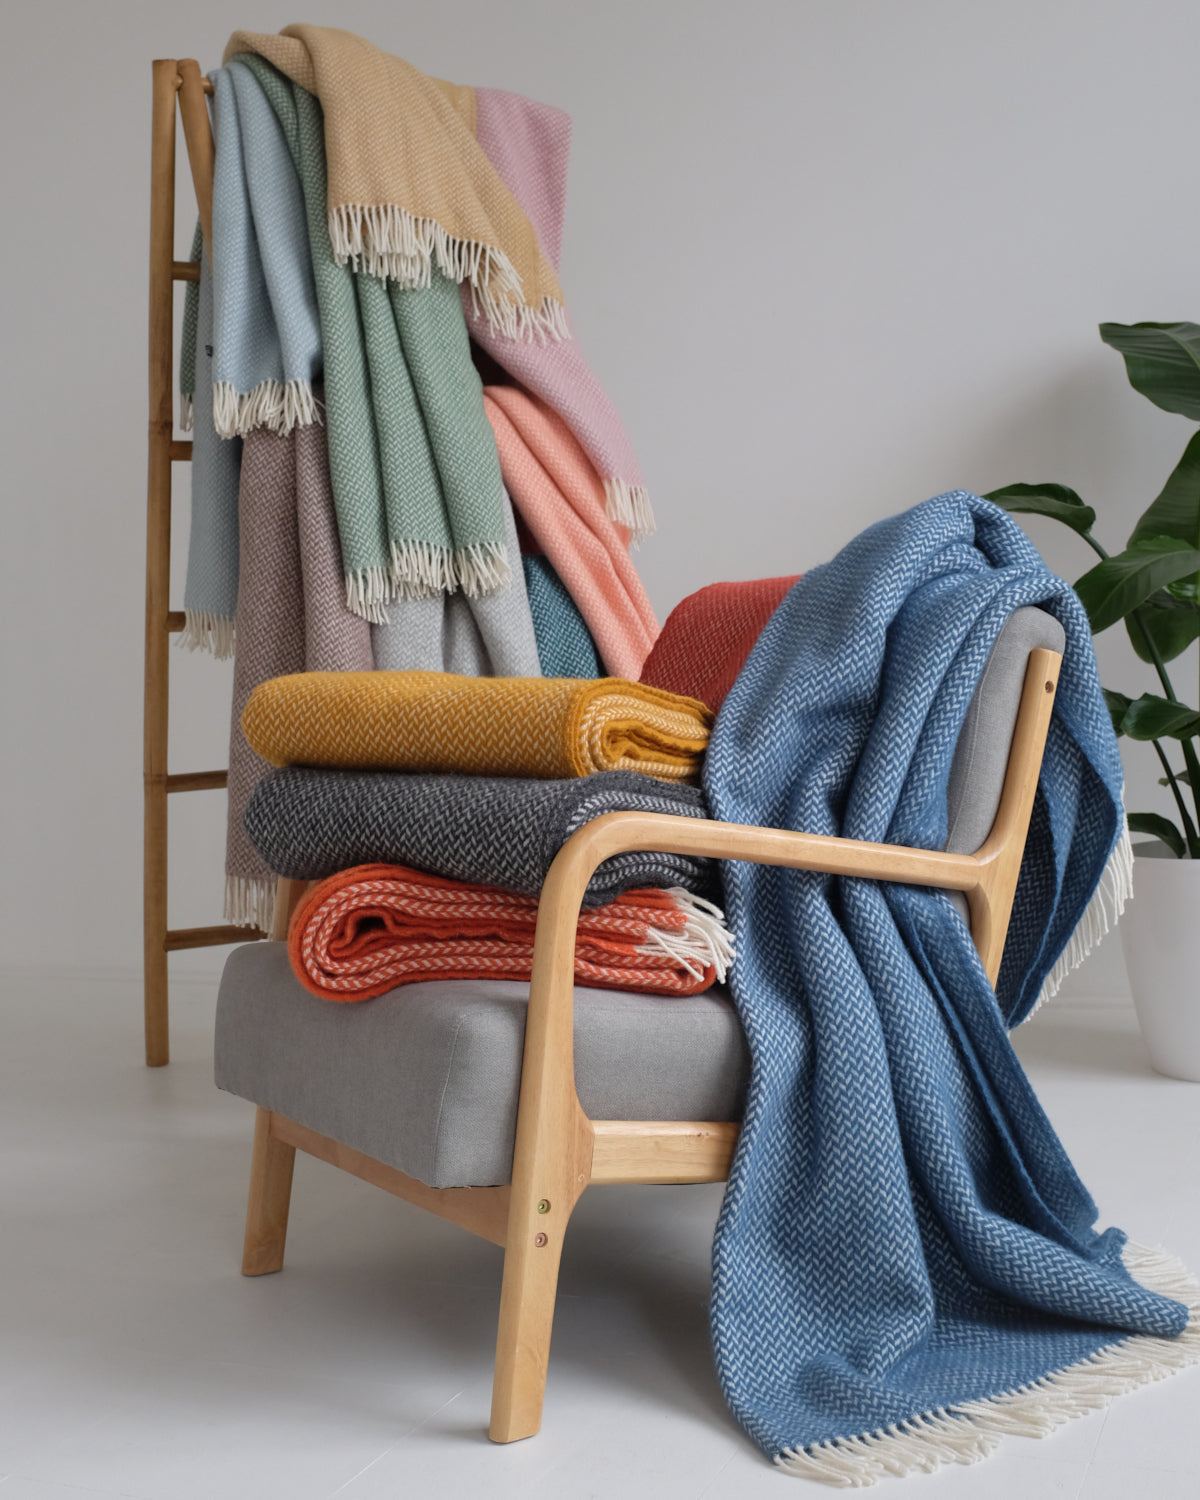 Folded wool blankets stacked on a lounge chair. Wool throws hanging on a wooden ladder behind the chair